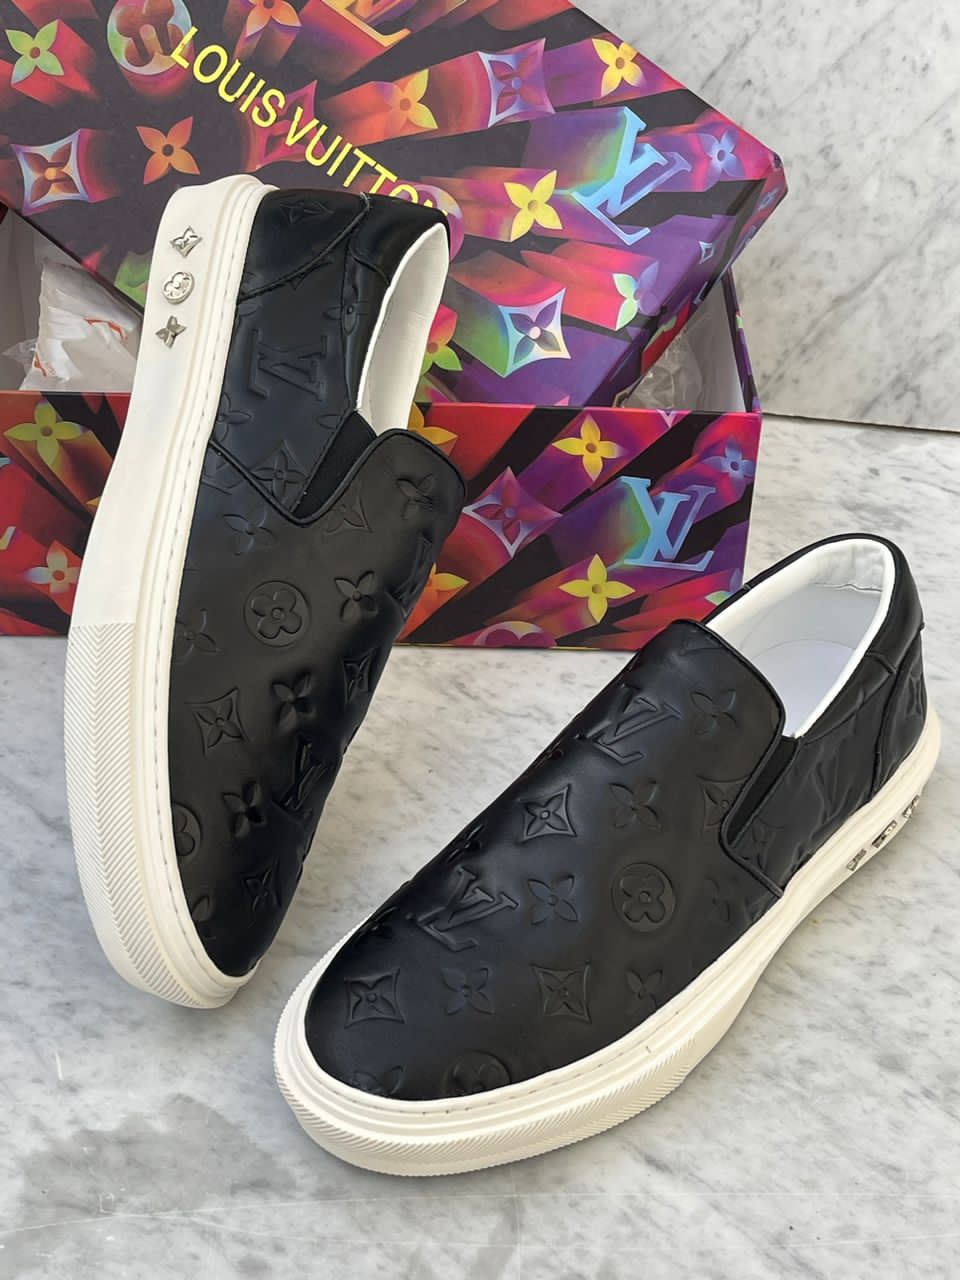 Louis Vuitton sneakers for Sale in Laurel, MD - OfferUp